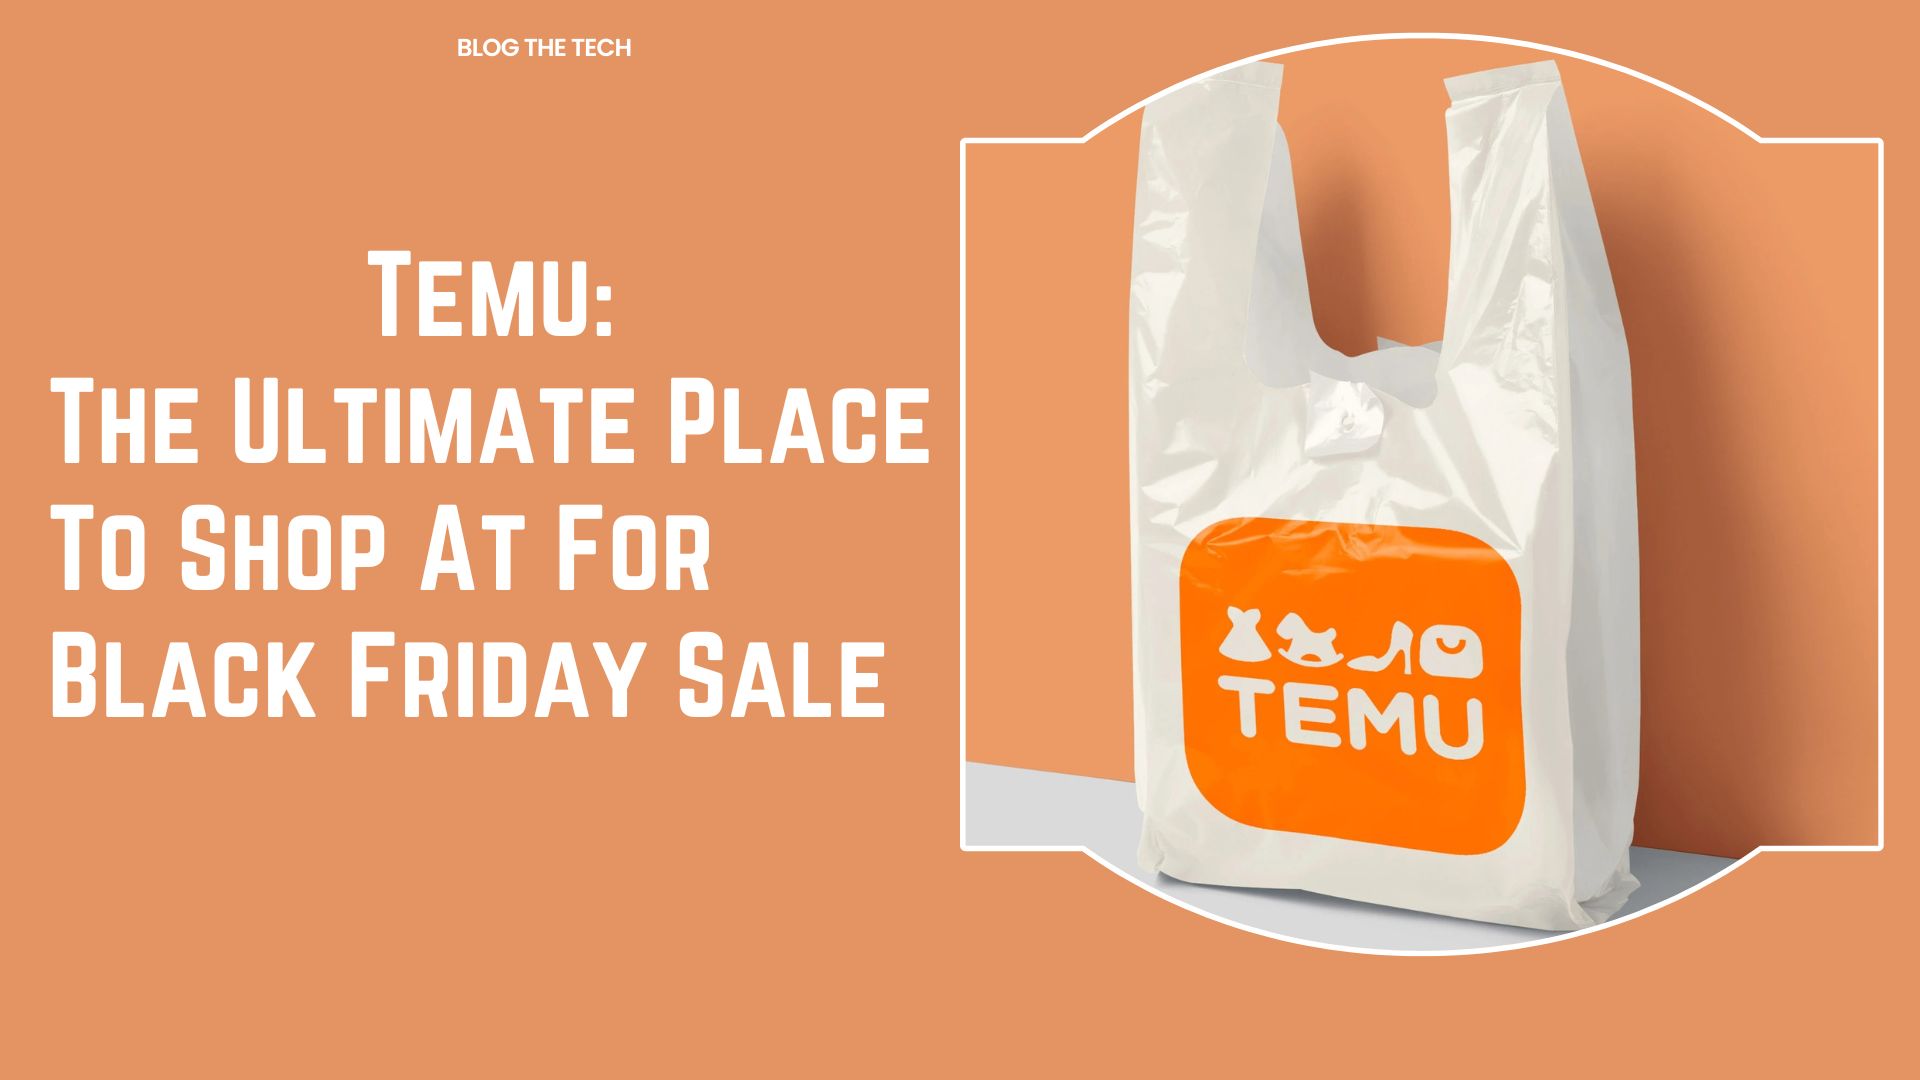 Temu: The Ultimate Place To Shop At For Black Friday Sale